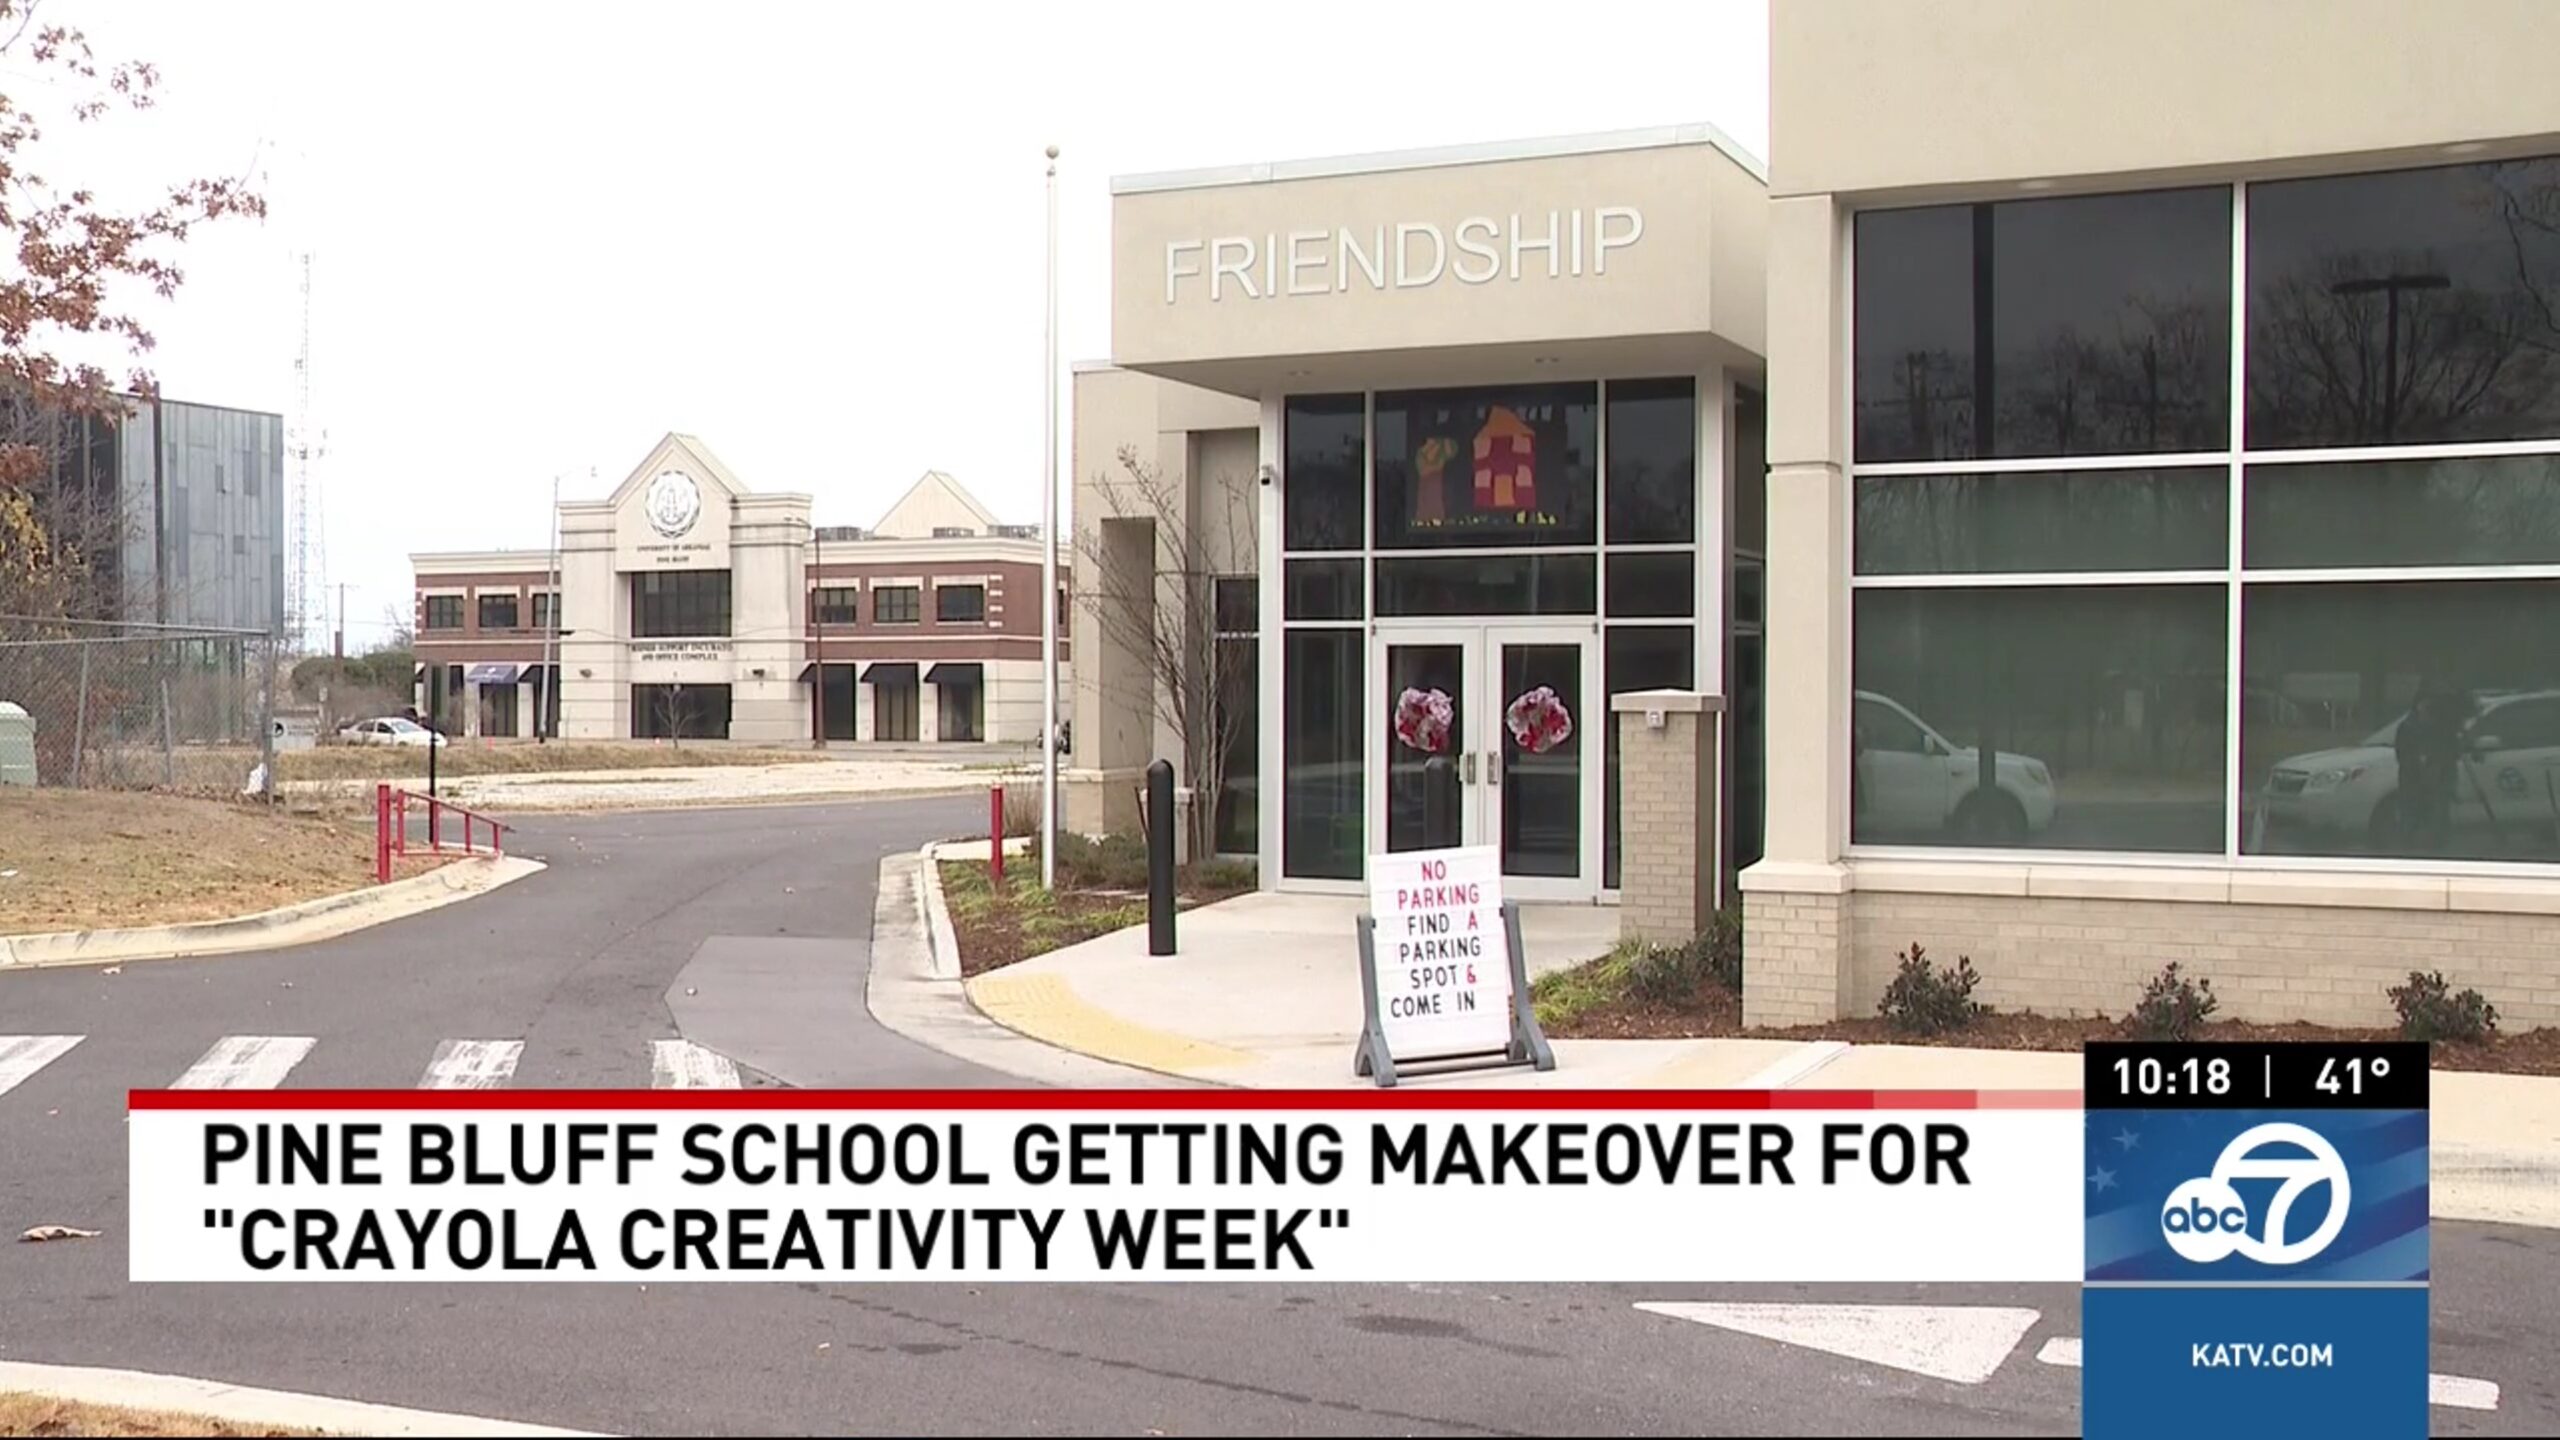 Pine Bluff school gets colorful makeover